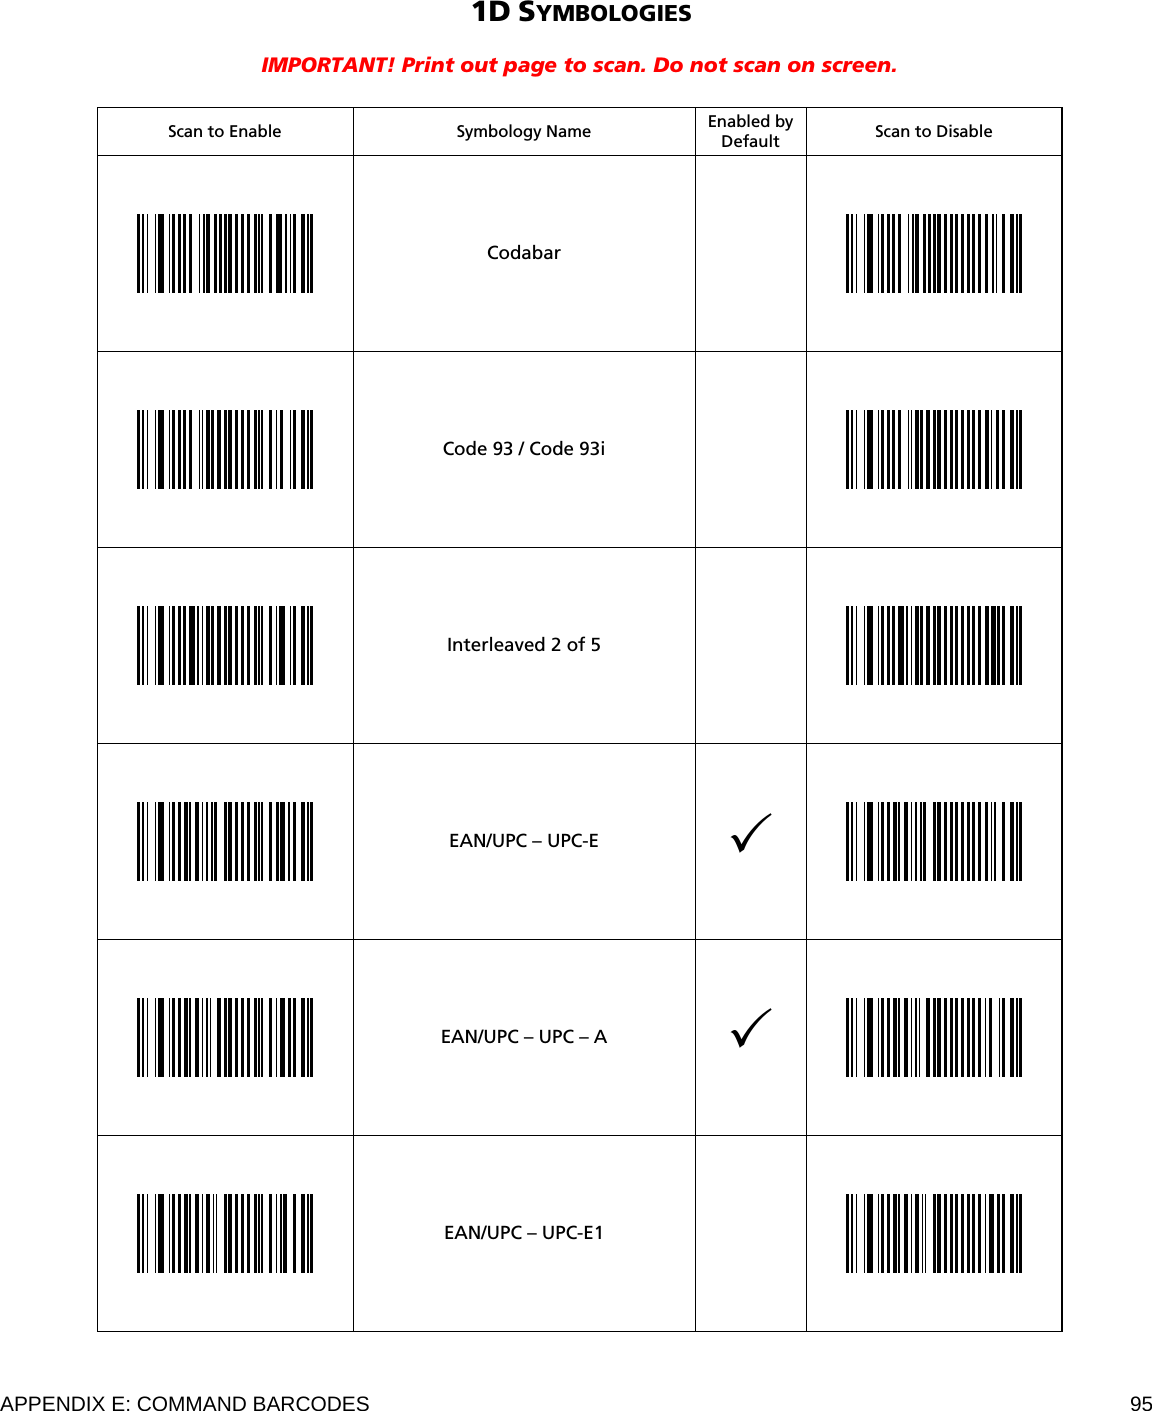  APPENDIX E: COMMAND BARCODES  95 1D SYMBOLOGIES  IMPORTANT! Print out page to scan. Do not scan on screen.   Scan to Enable  Symbology Name Enabled by Default  Scan to Disable  Codabar     Code 93 / Code 93i    Interleaved 2 of 5     EAN/UPC – UPC-E     EAN/UPC – UPC – A     EAN/UPC – UPC-E1     